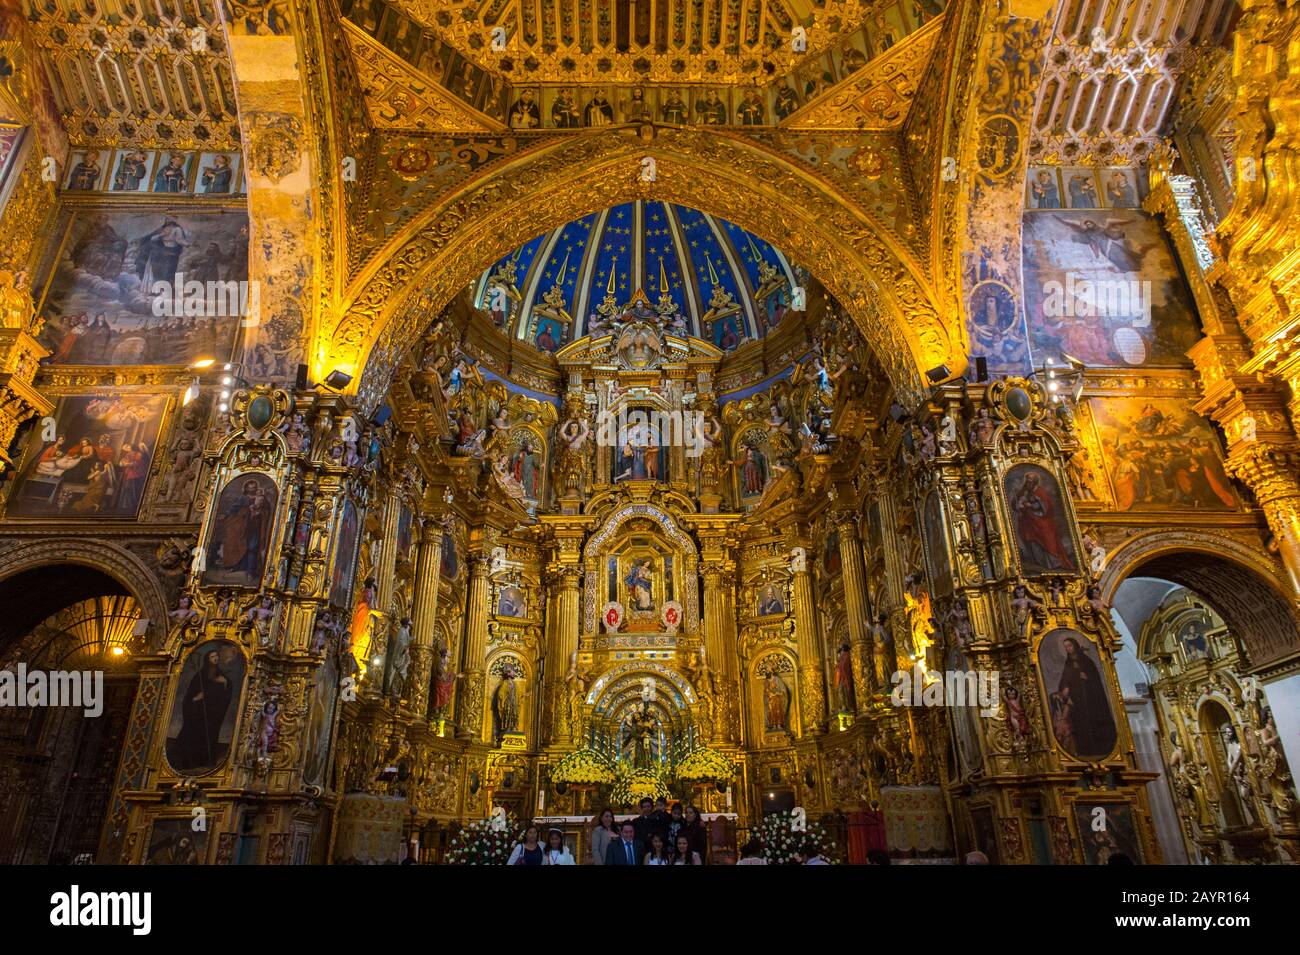 Painted with gold leaf the interior of the San Francisco Church is the most lavish historical church in the historic center (UNESCO World Heritage Sit Stock Photo